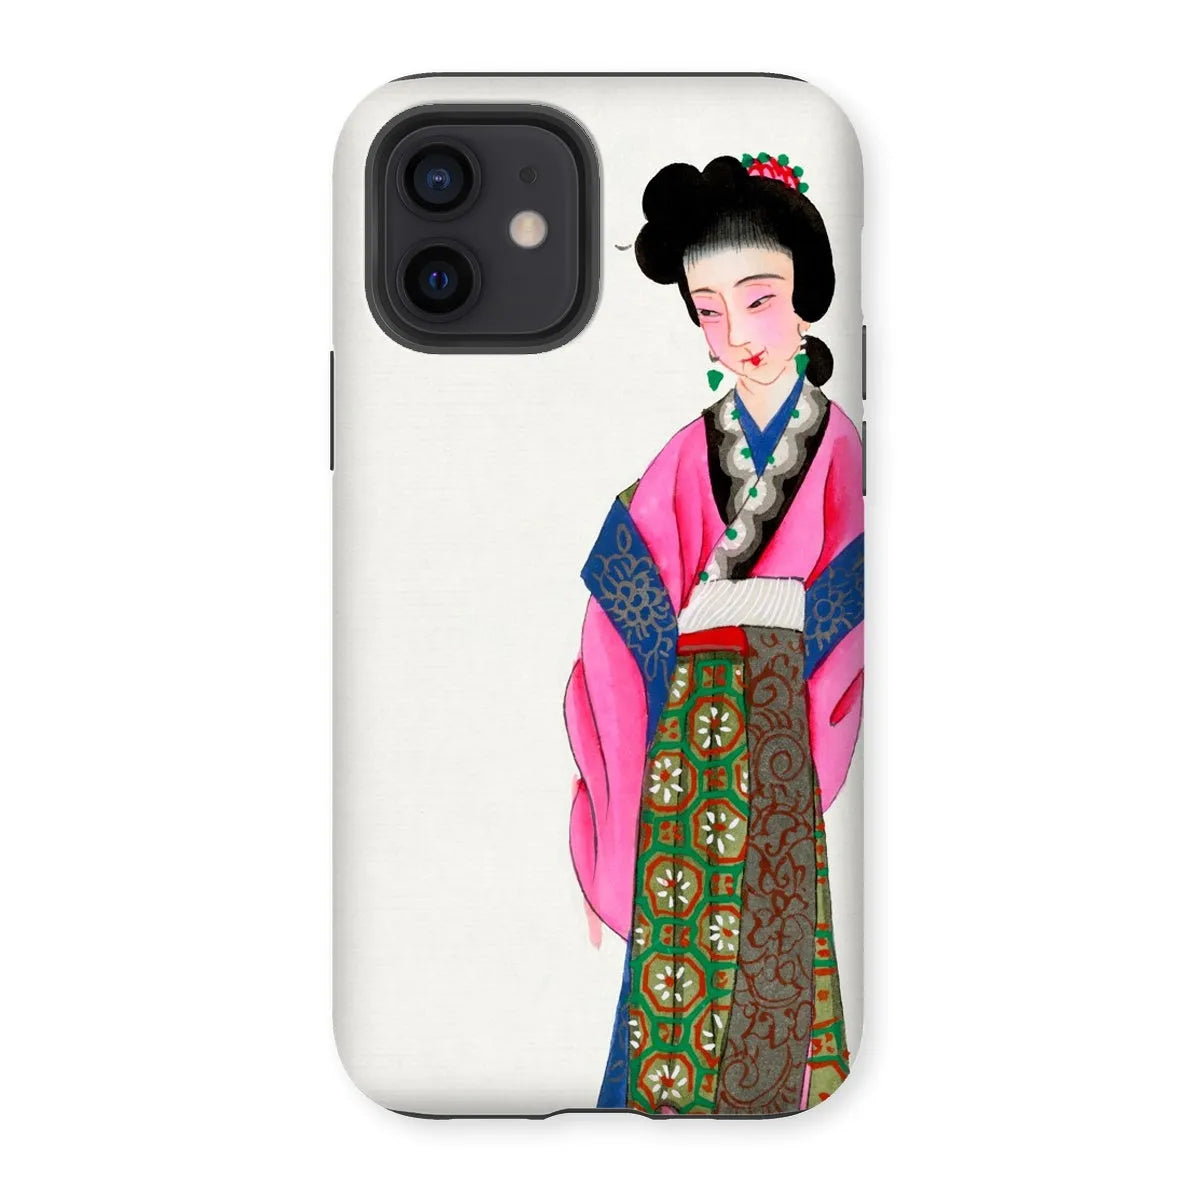 Noblewoman - Chinese Aesthetic Manchu Art Phone Case - Iphone 12 / Matte - Mobile Phone Cases - Aesthetic Art